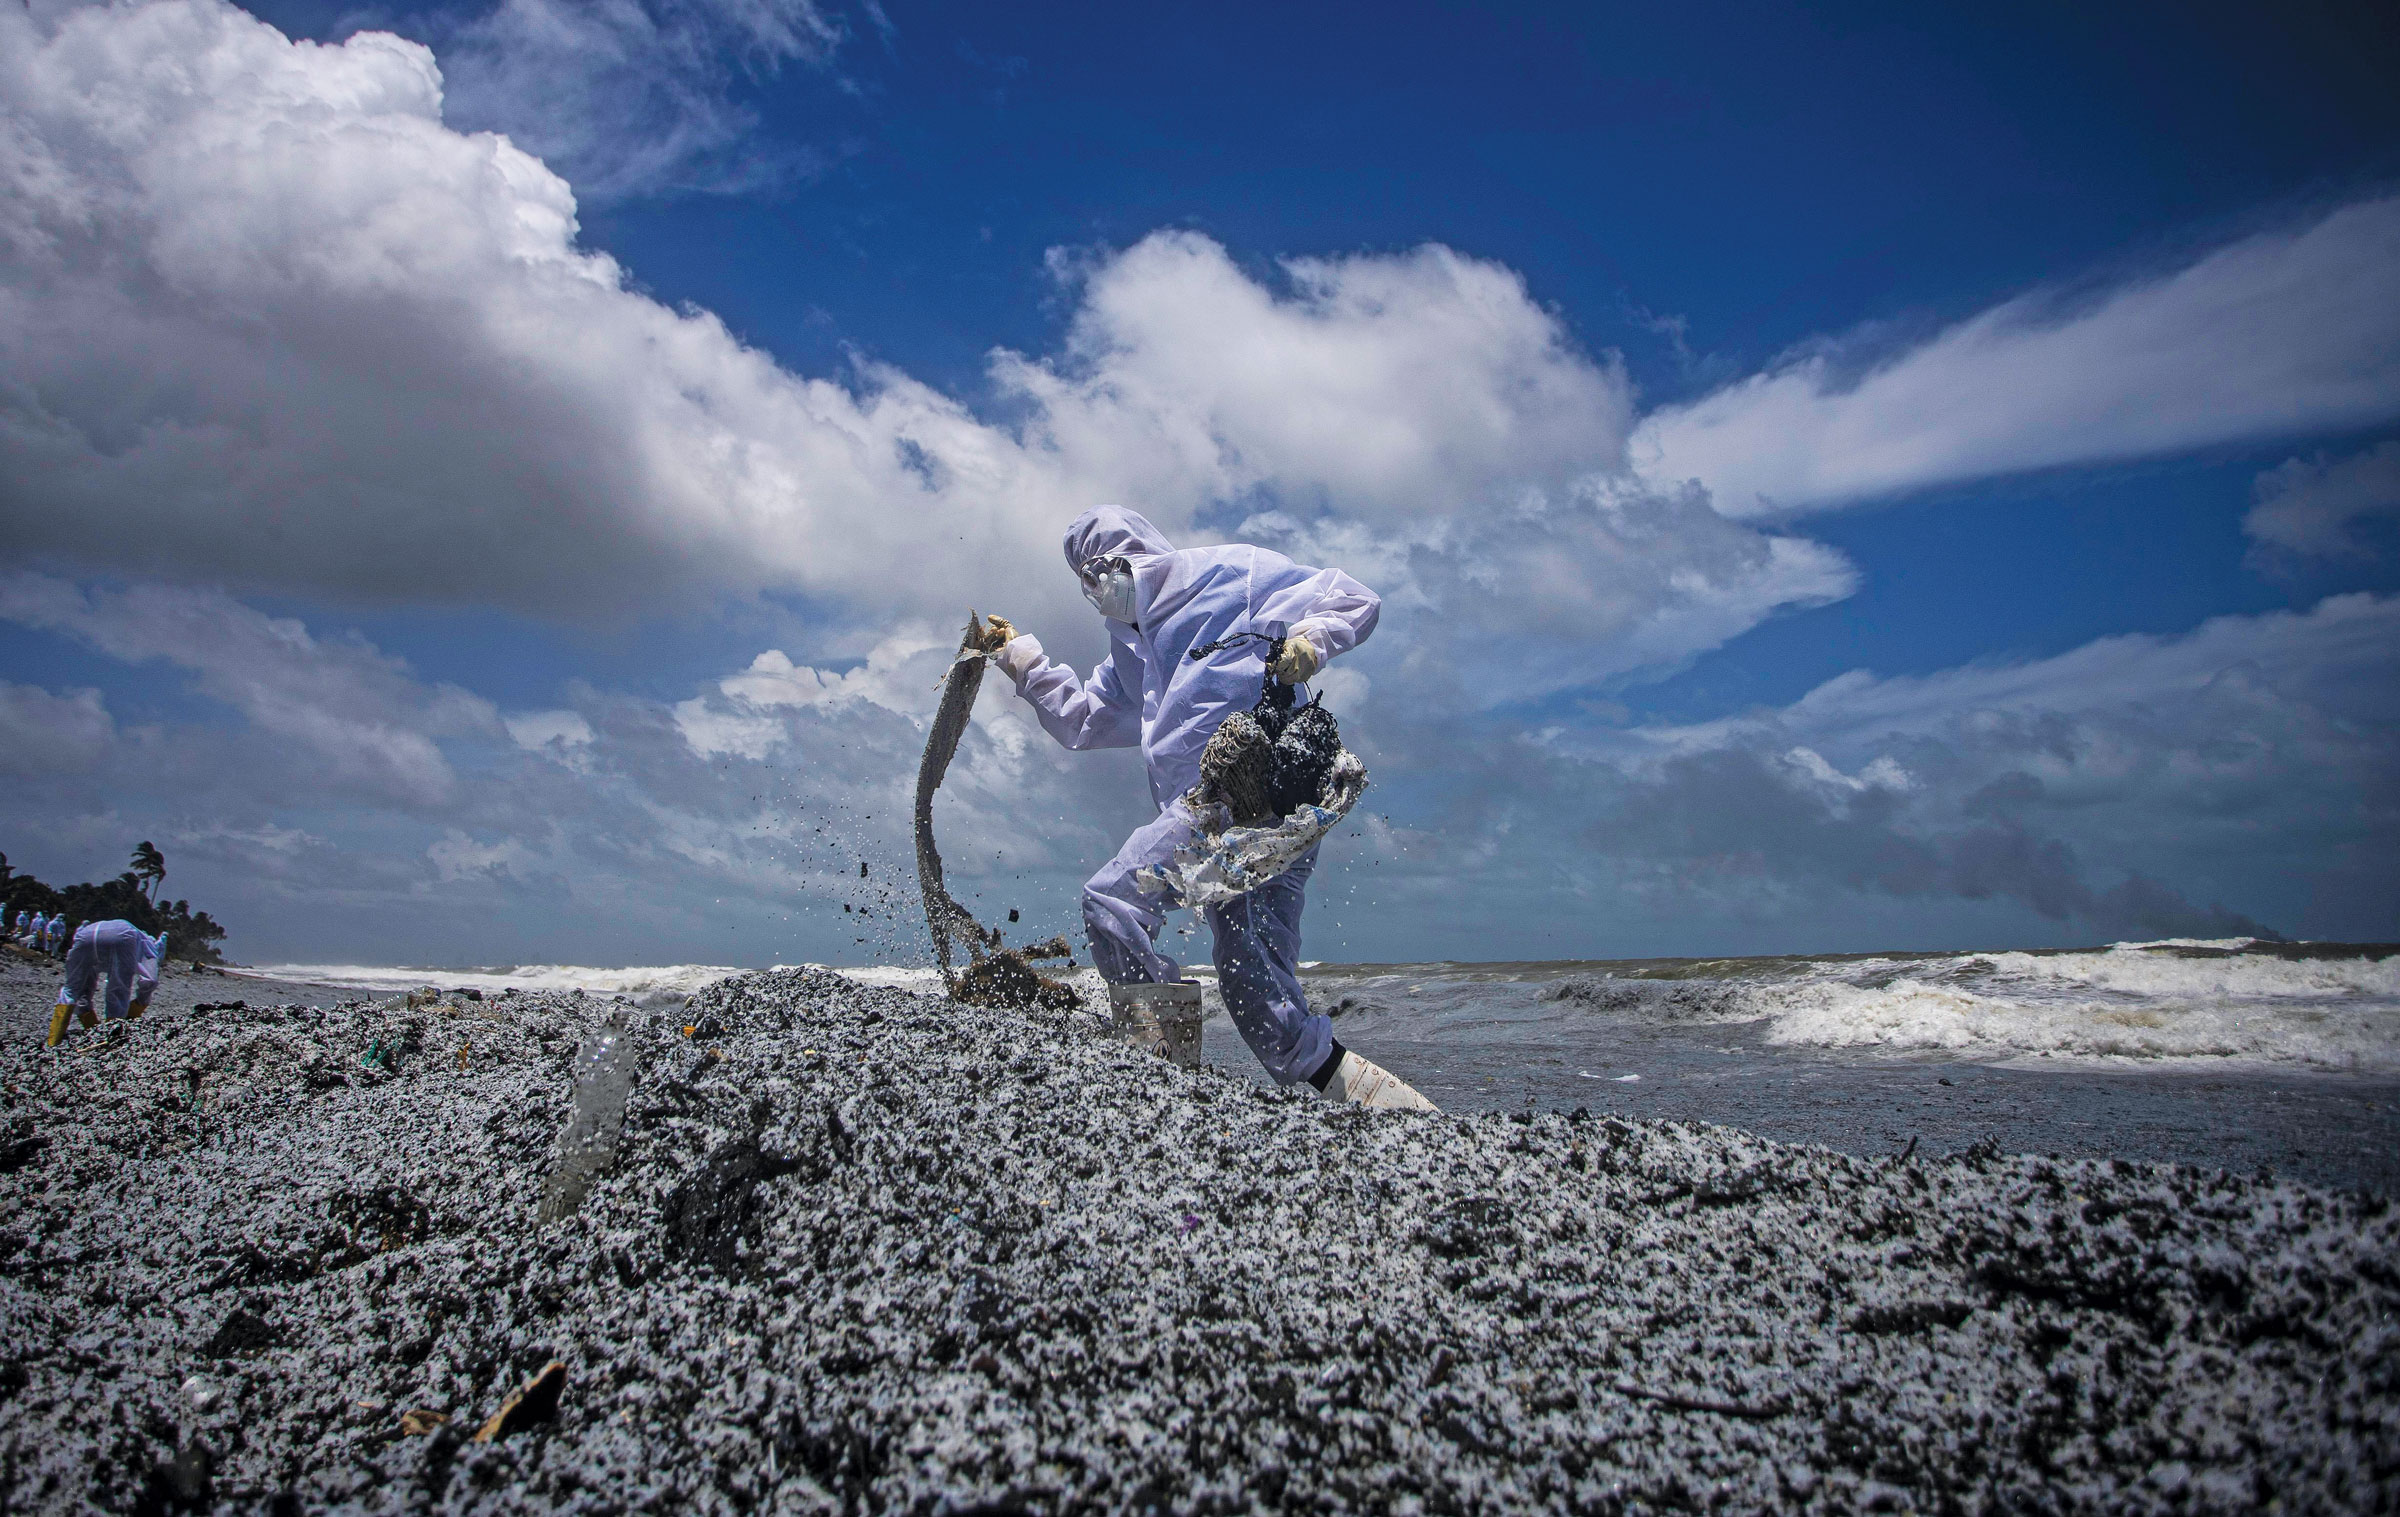 Grappling with the biggest marine plastic spill in history